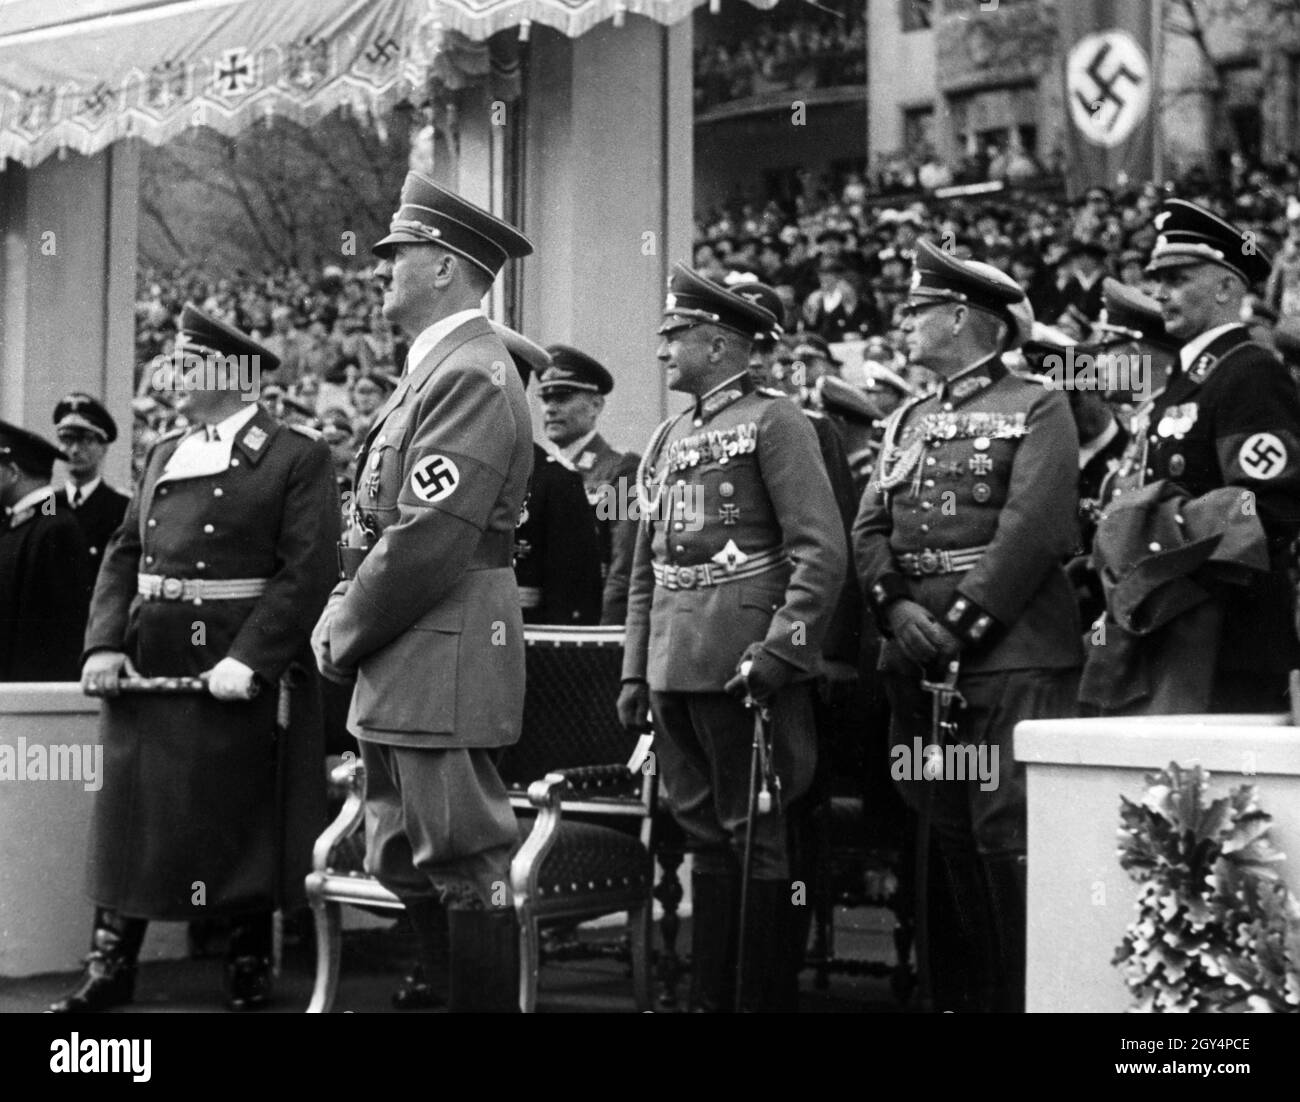 In the year of the outbreak of World War II, Adolf Hitler's birthday was celebrated with the largest military parade in German history. Behind Hitler are Hermann Göring, Erich Raeder (obscured), Walther von Brauchitsch and Wilhelm Keitel. [automated translation] Stock Photo